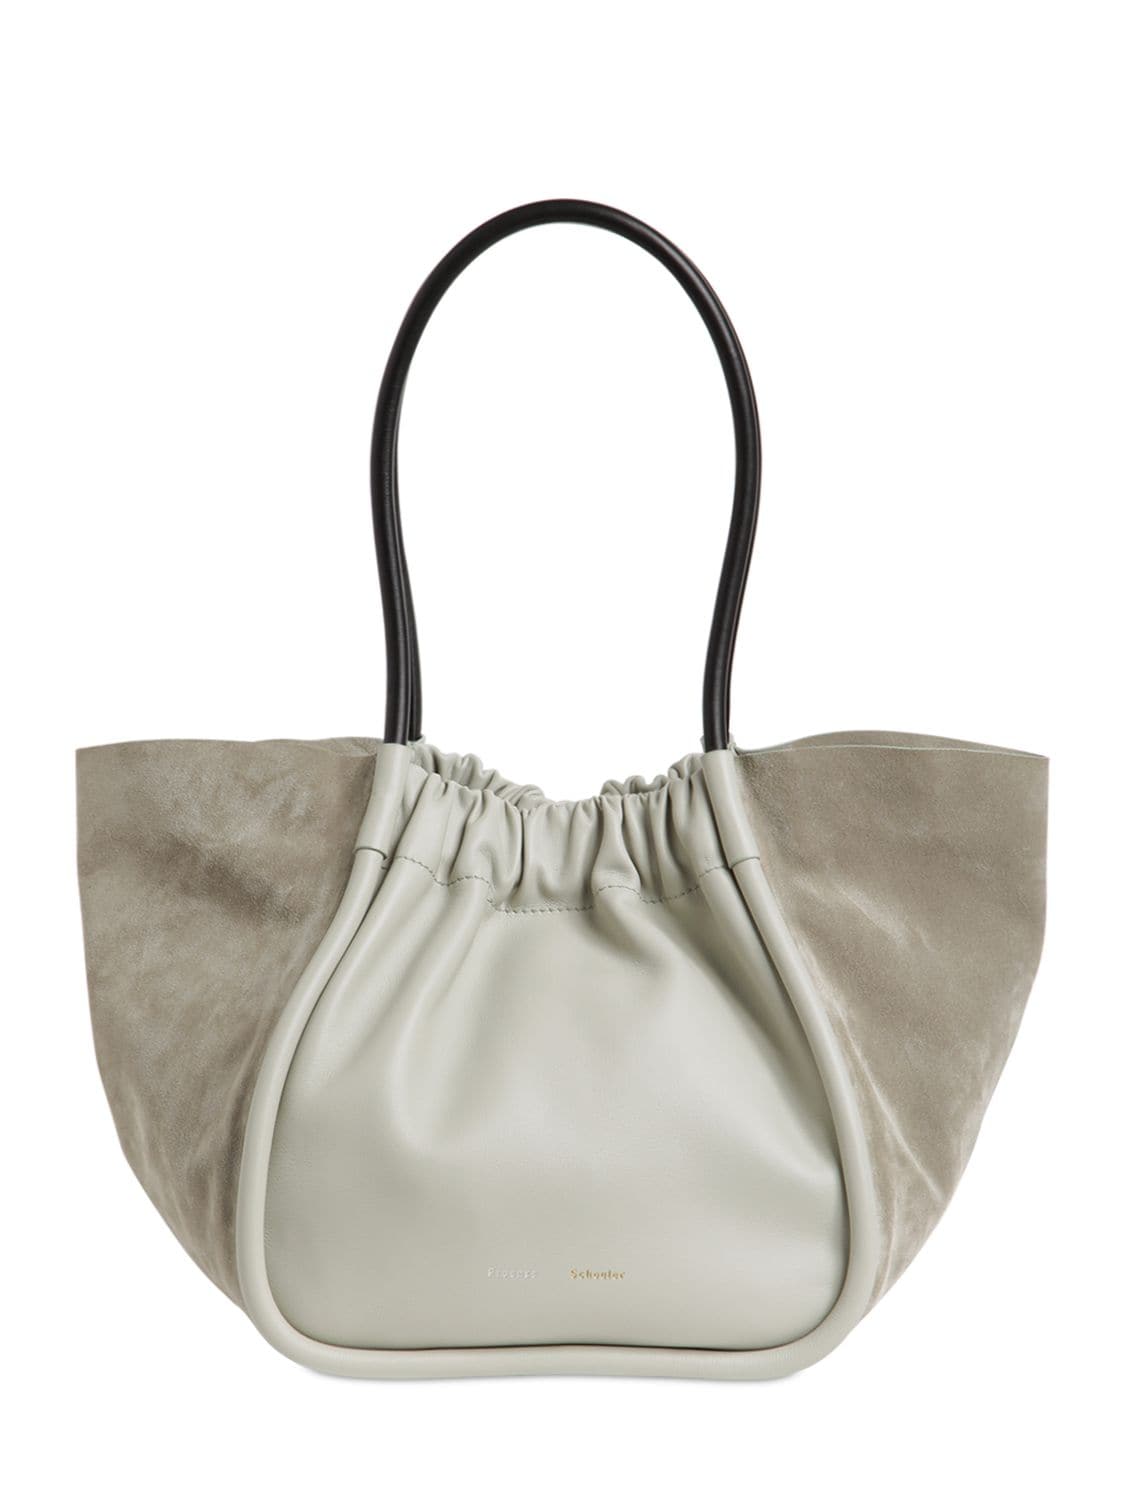 Proenza Schouler Large Smooth Leather & Suede Tote Bag In Celadon ...